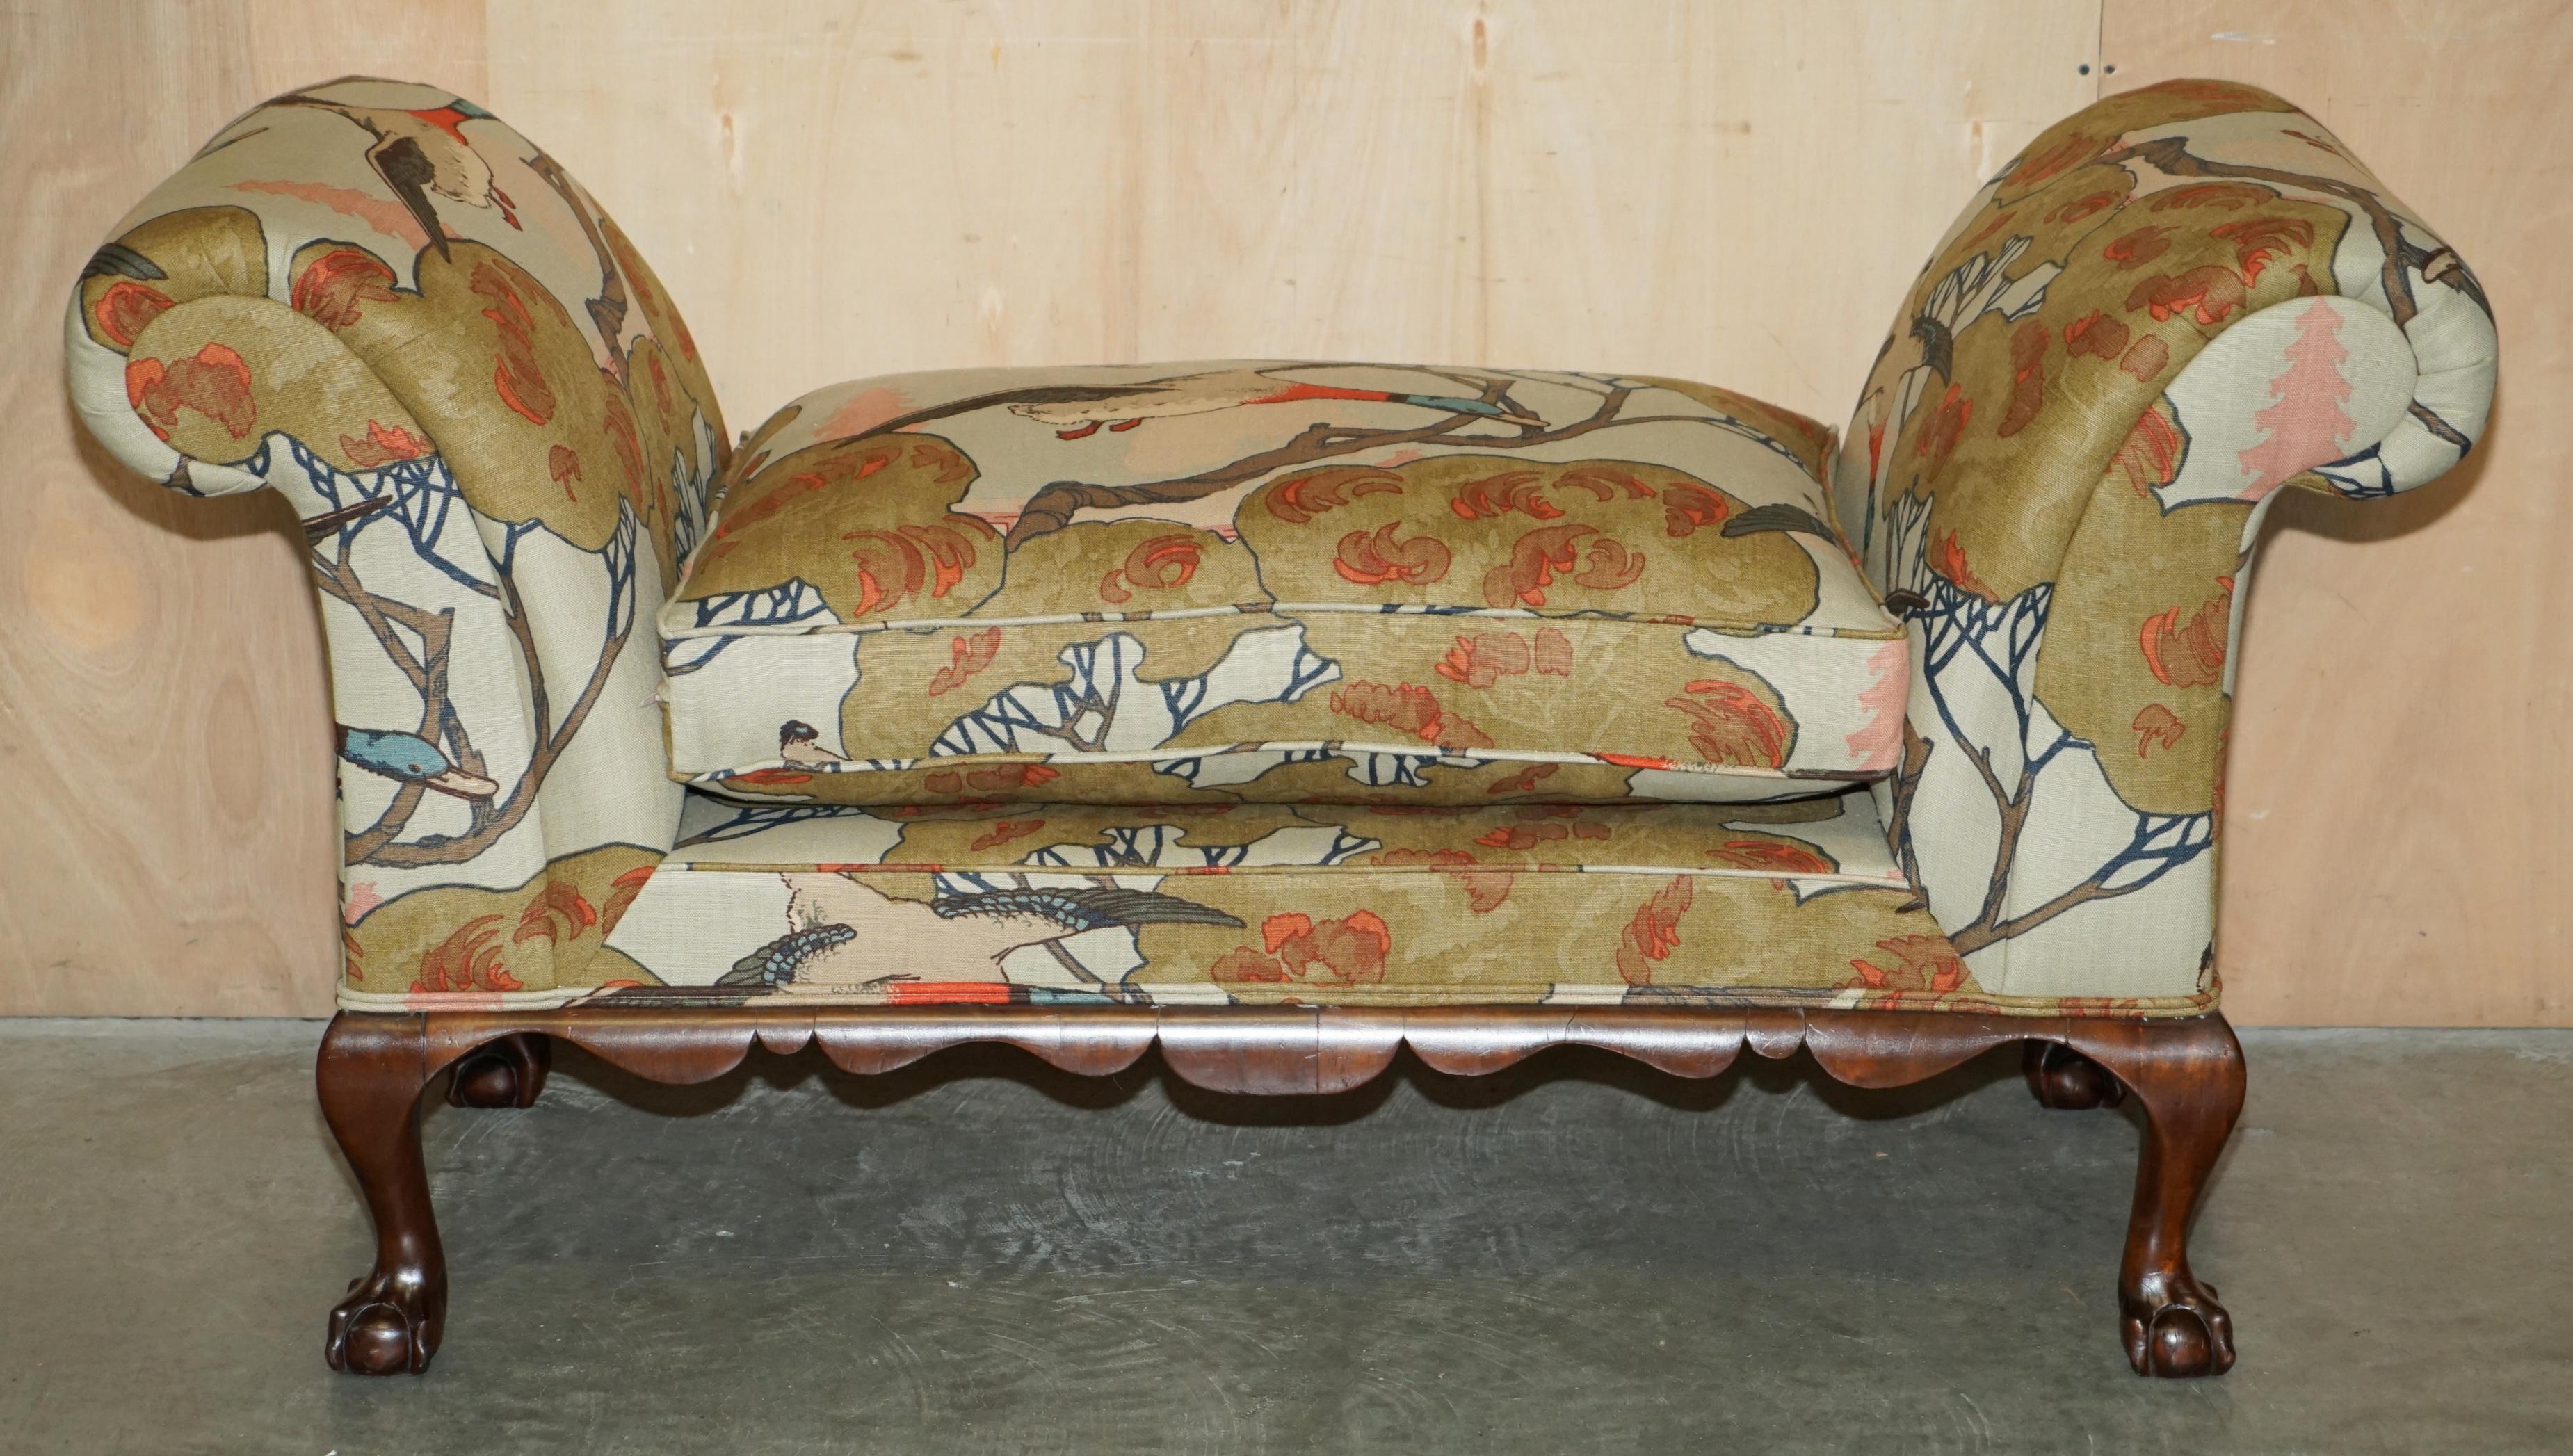 ANTIQUE CLAW & BALL FOOT HALL BENCH WiNDOW SEAT IN MULBERRY FLYING DUCK S FABRIC (Land) im Angebot